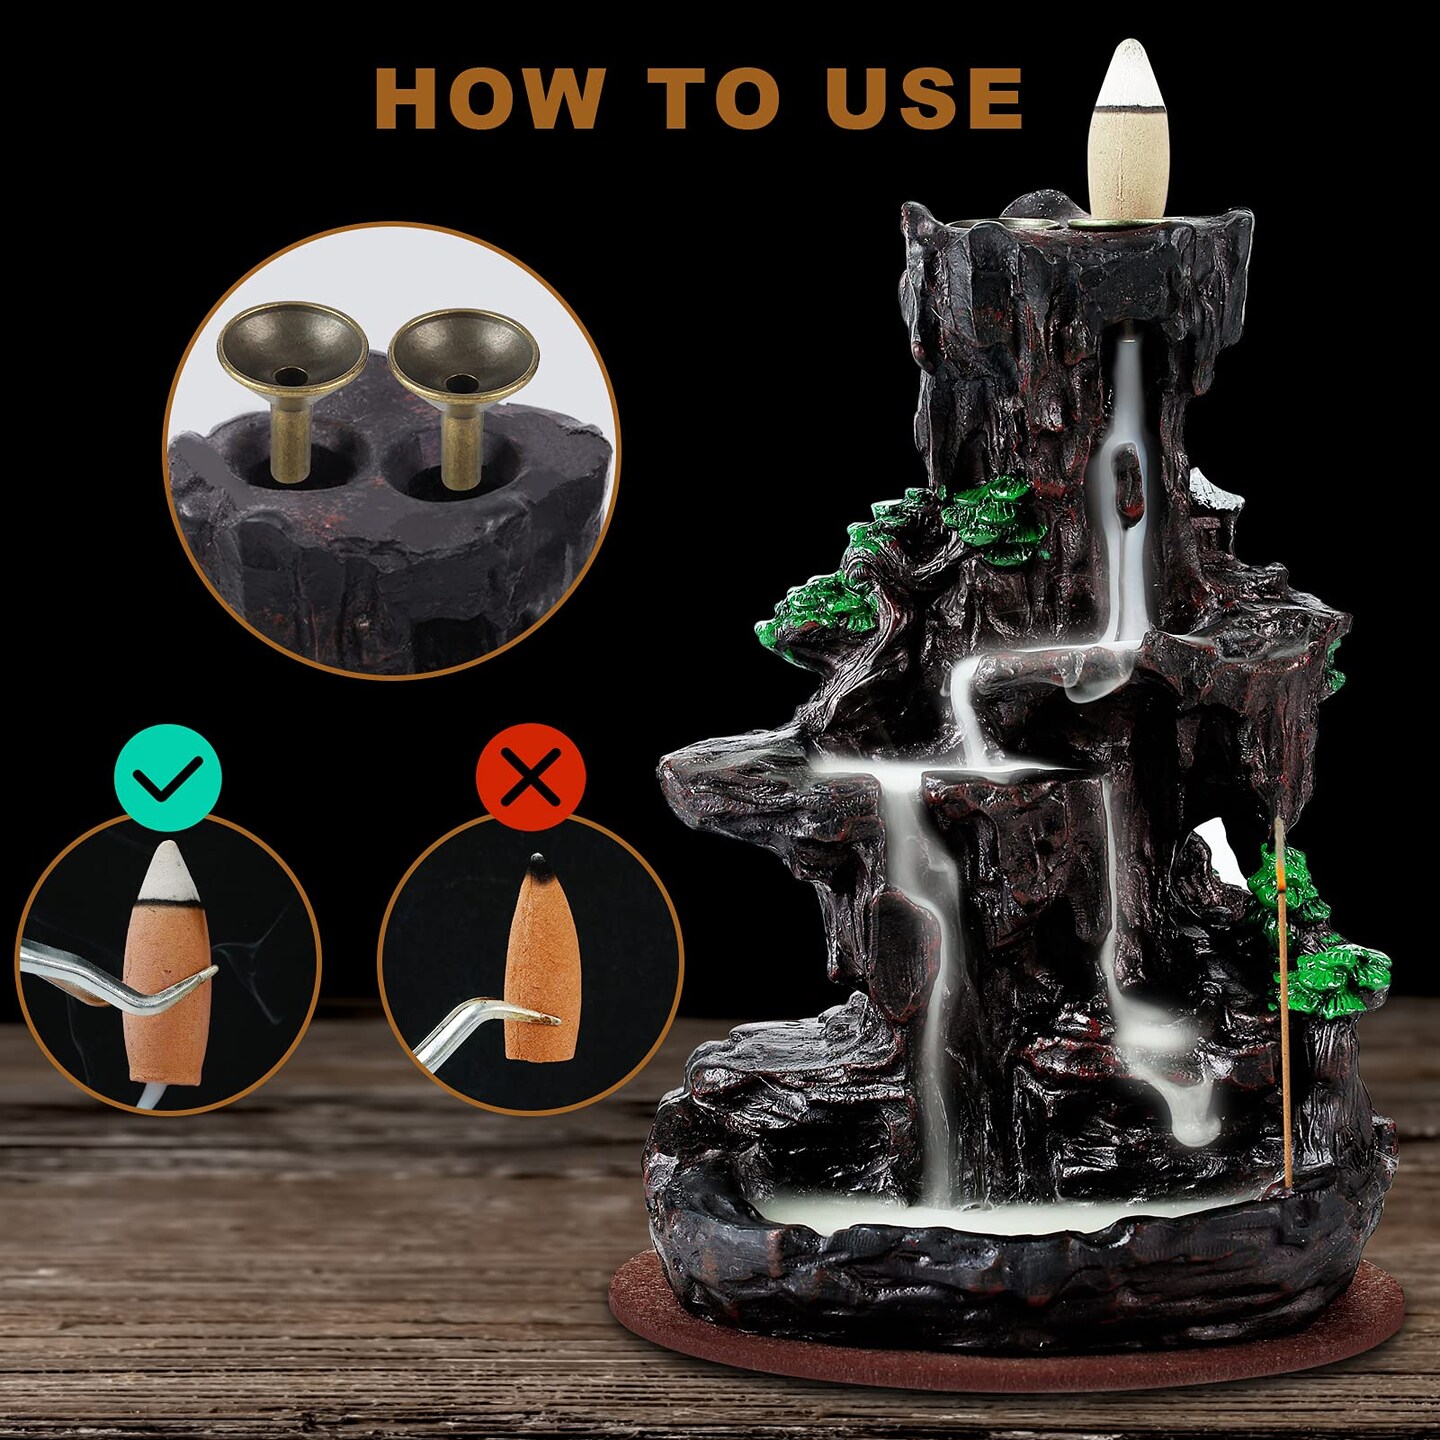 SPACEKEEPER Incense Burner, Backflow Holder Waterfall 2 Sides, with 120 Cones, 30 Sticks, Aromatcherapy Ornamen